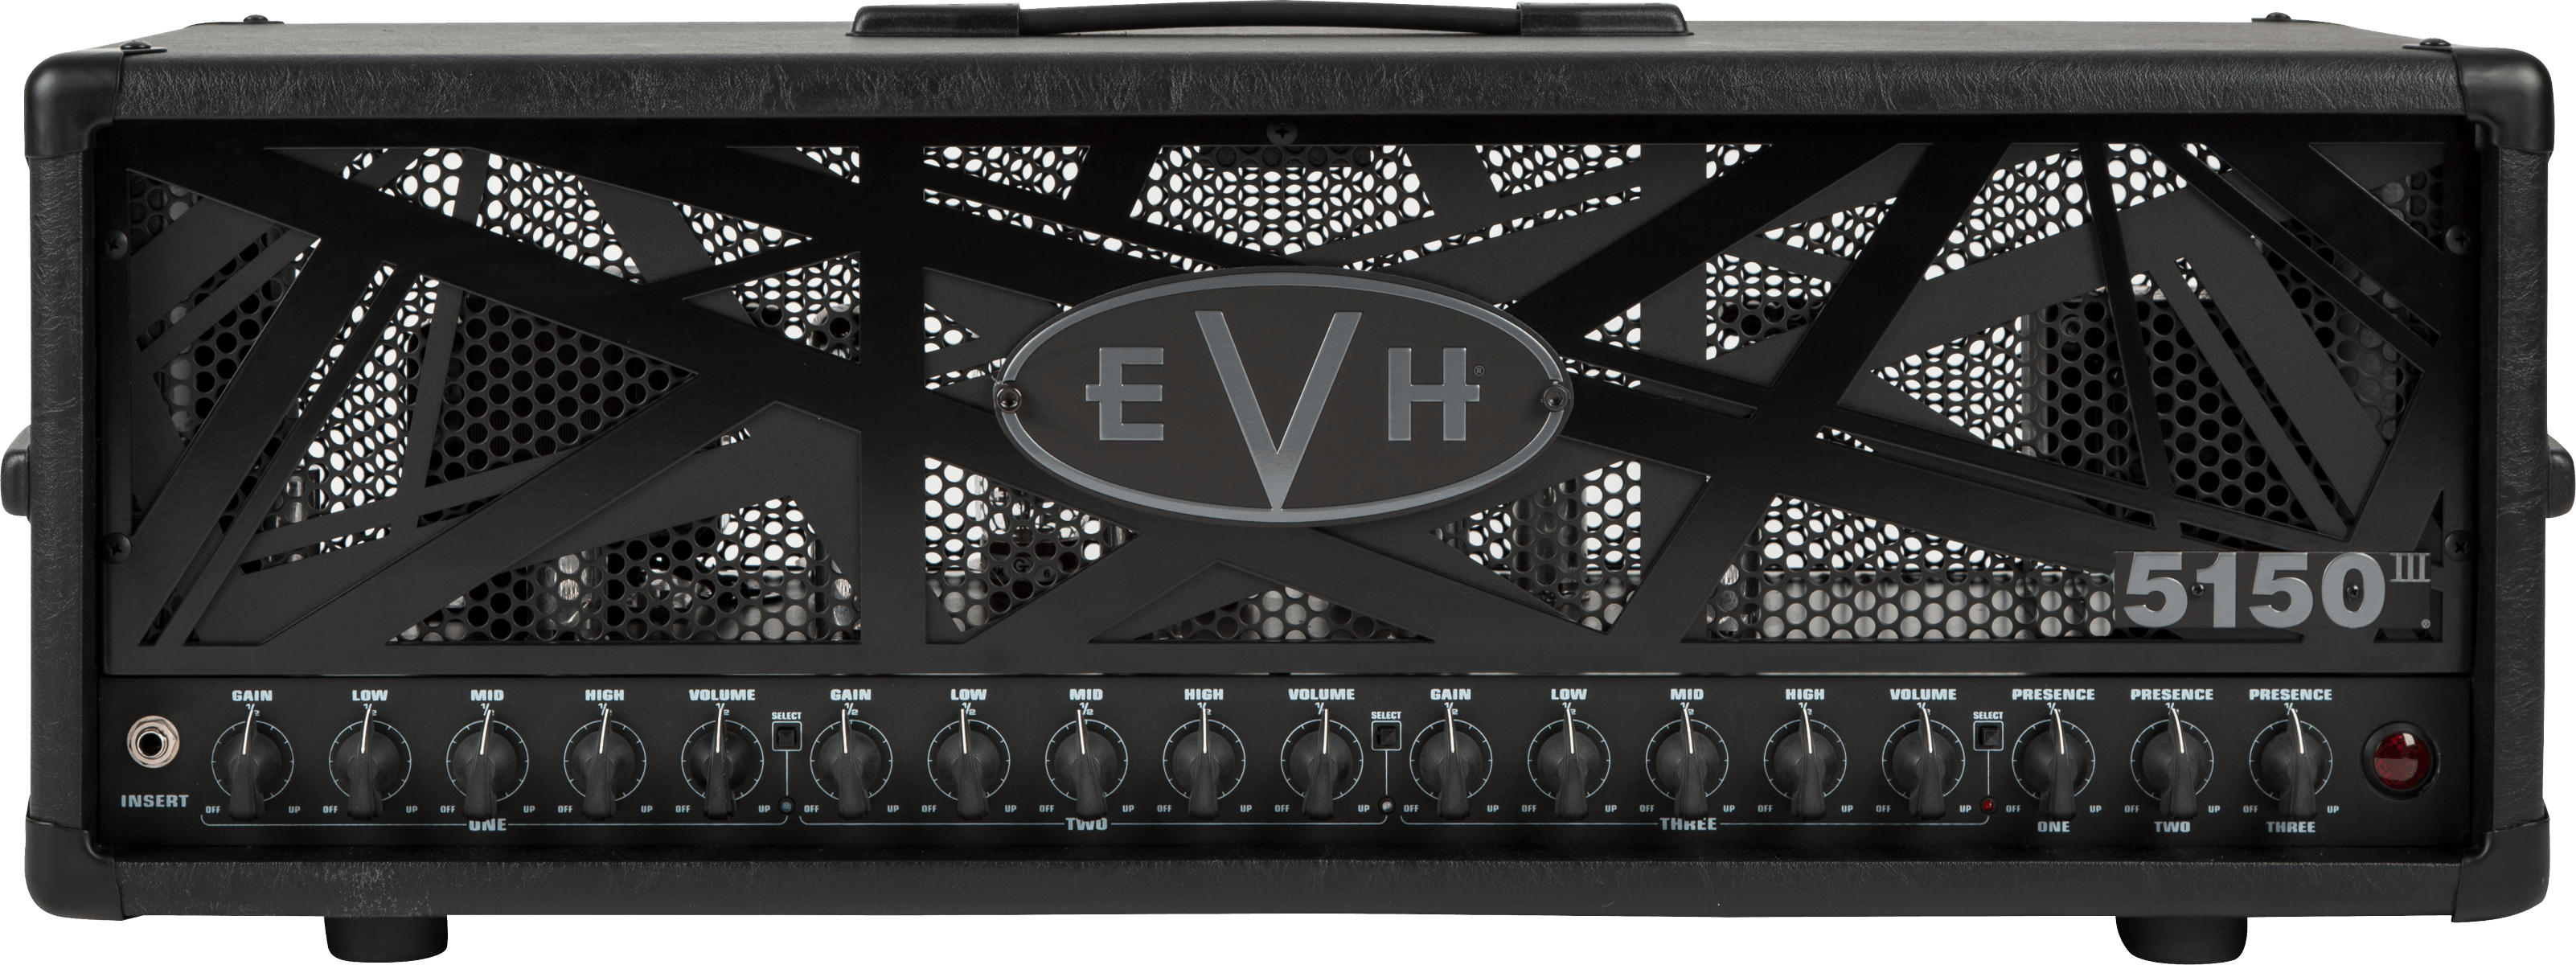 EVH 5150 III 100S Limited Edition Head in Black Stealth - The 